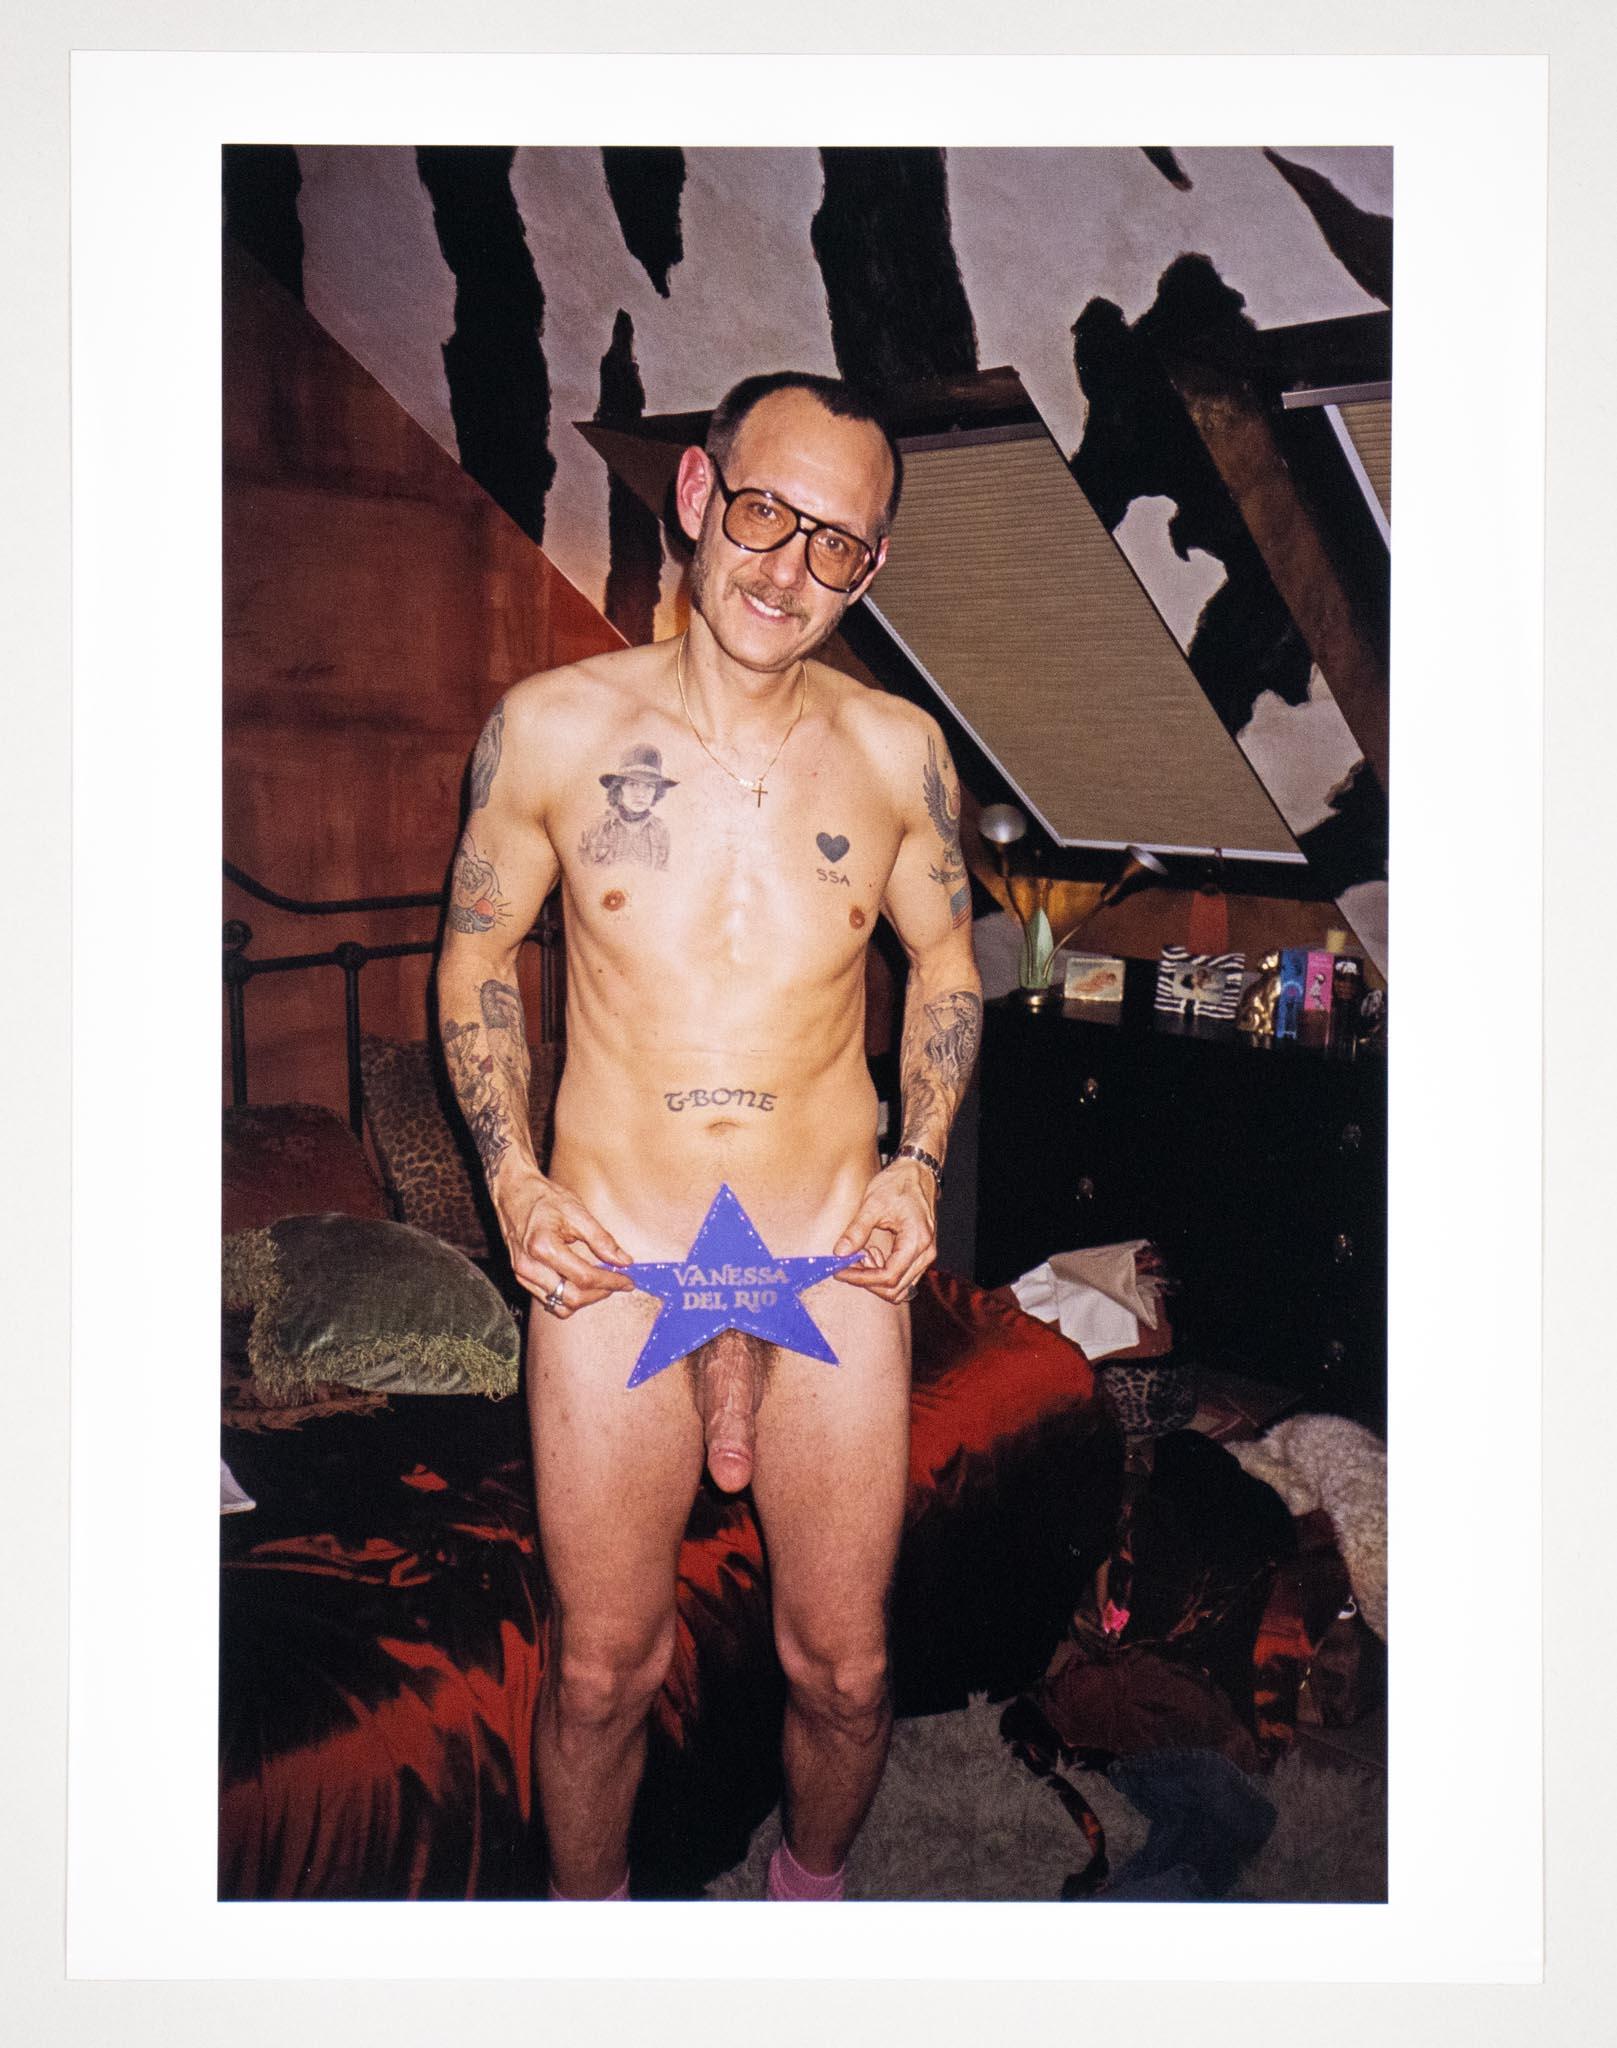 Terry RICHARDSON
Vanessa

Original print in very good condition
Hand-signed verso
From Taschen's 